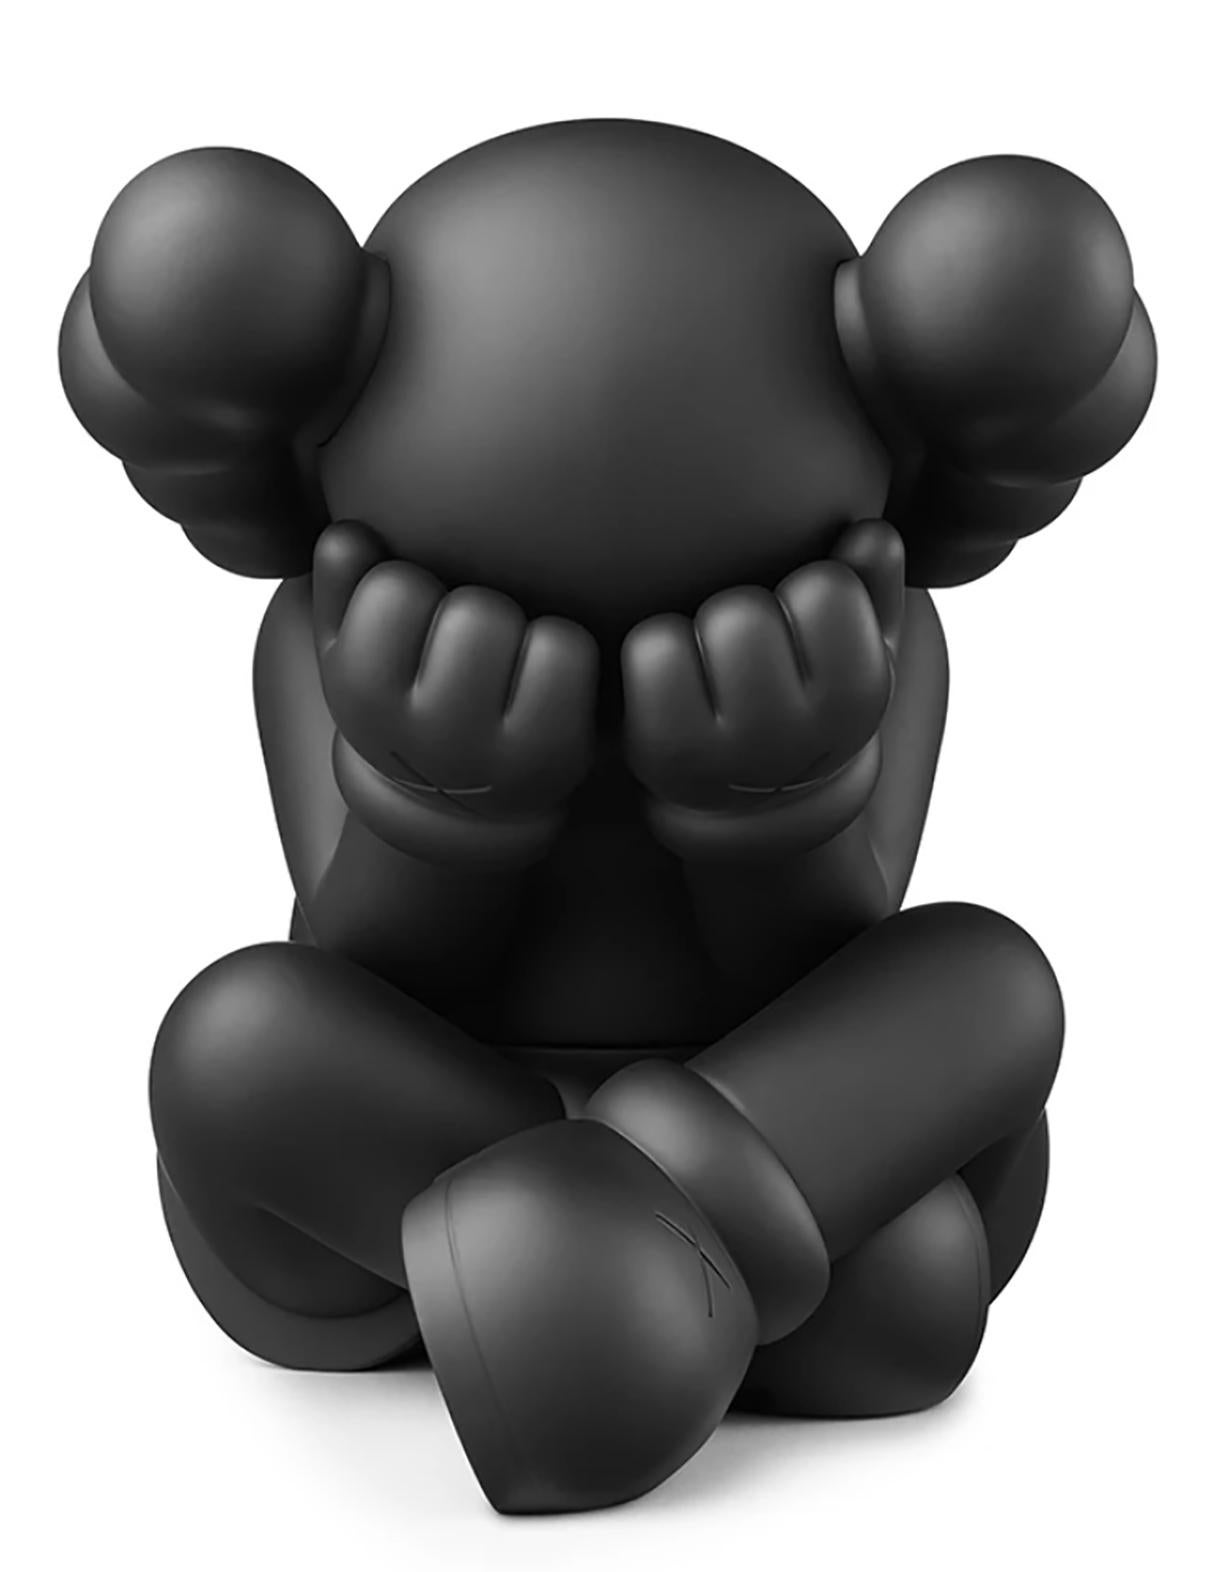 KAWS SEPARATED complete set of 3 works (KAWS Separated Companion set)  For Sale 2